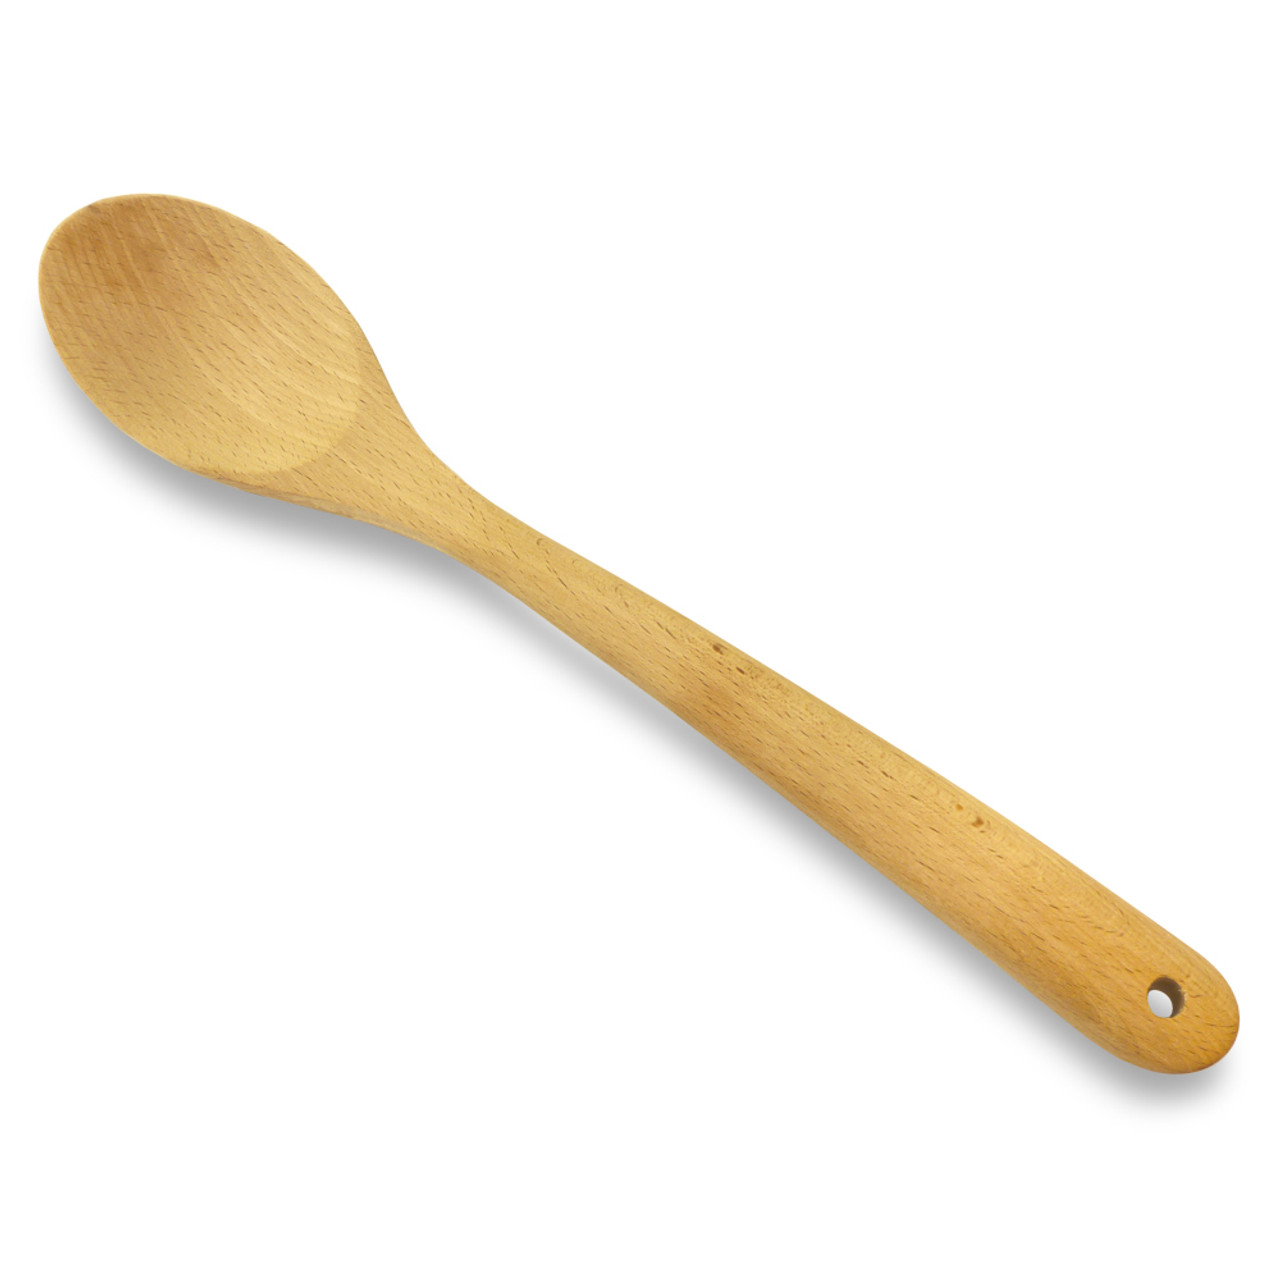 Wood spoons treated with walnut oil, mineral oil, coconut oil and